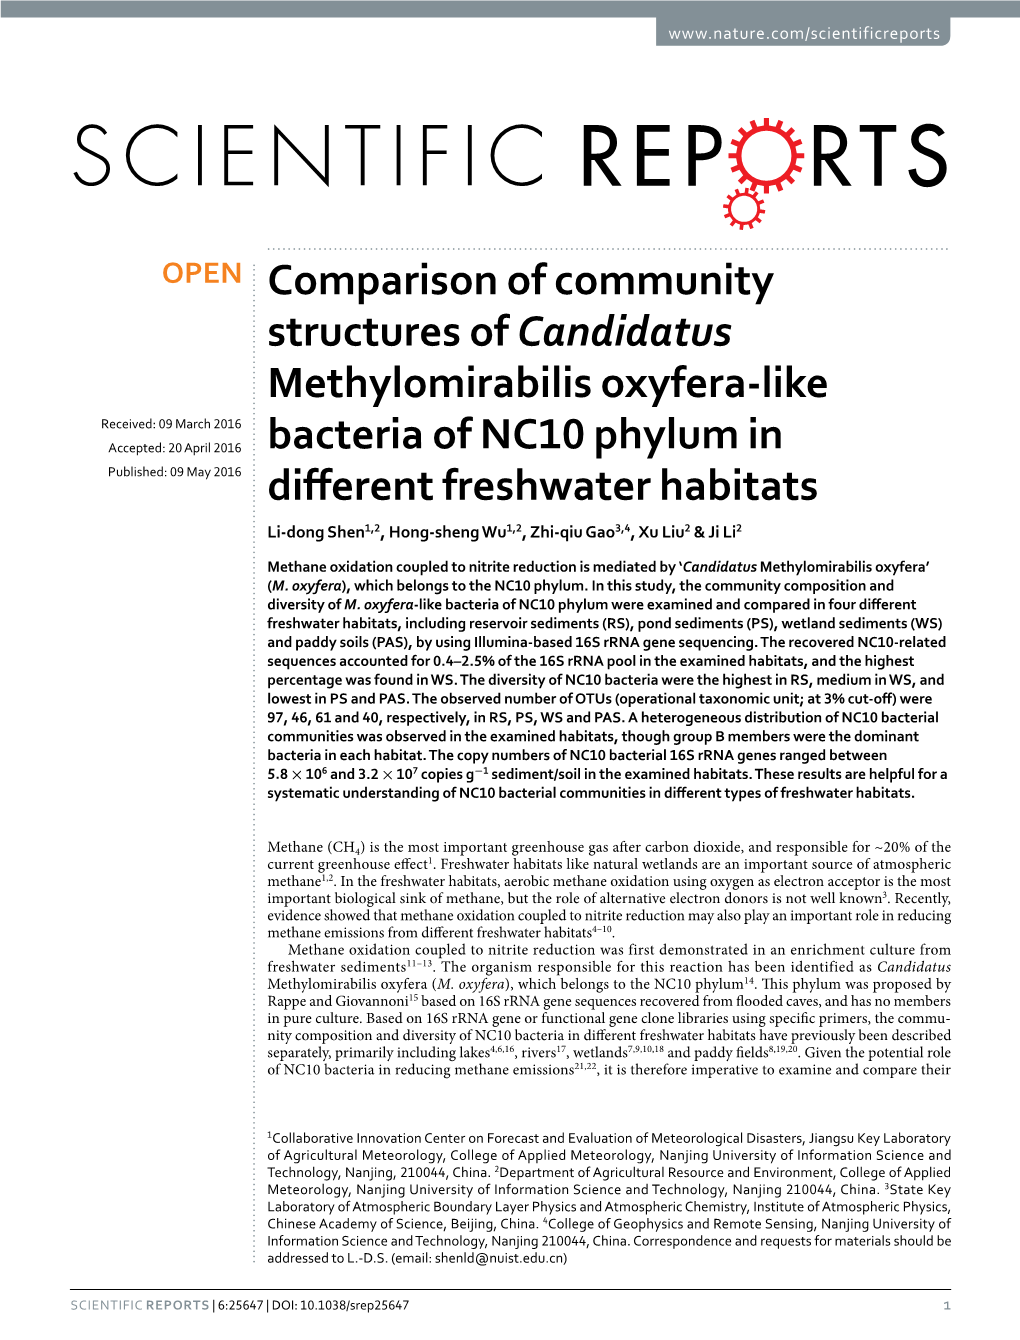 Comparison of Community Structures of Candidatus Methylomirabilis Oxyfera-Like Bacteria of NC10 Phylum in Different Freshwater Habitats